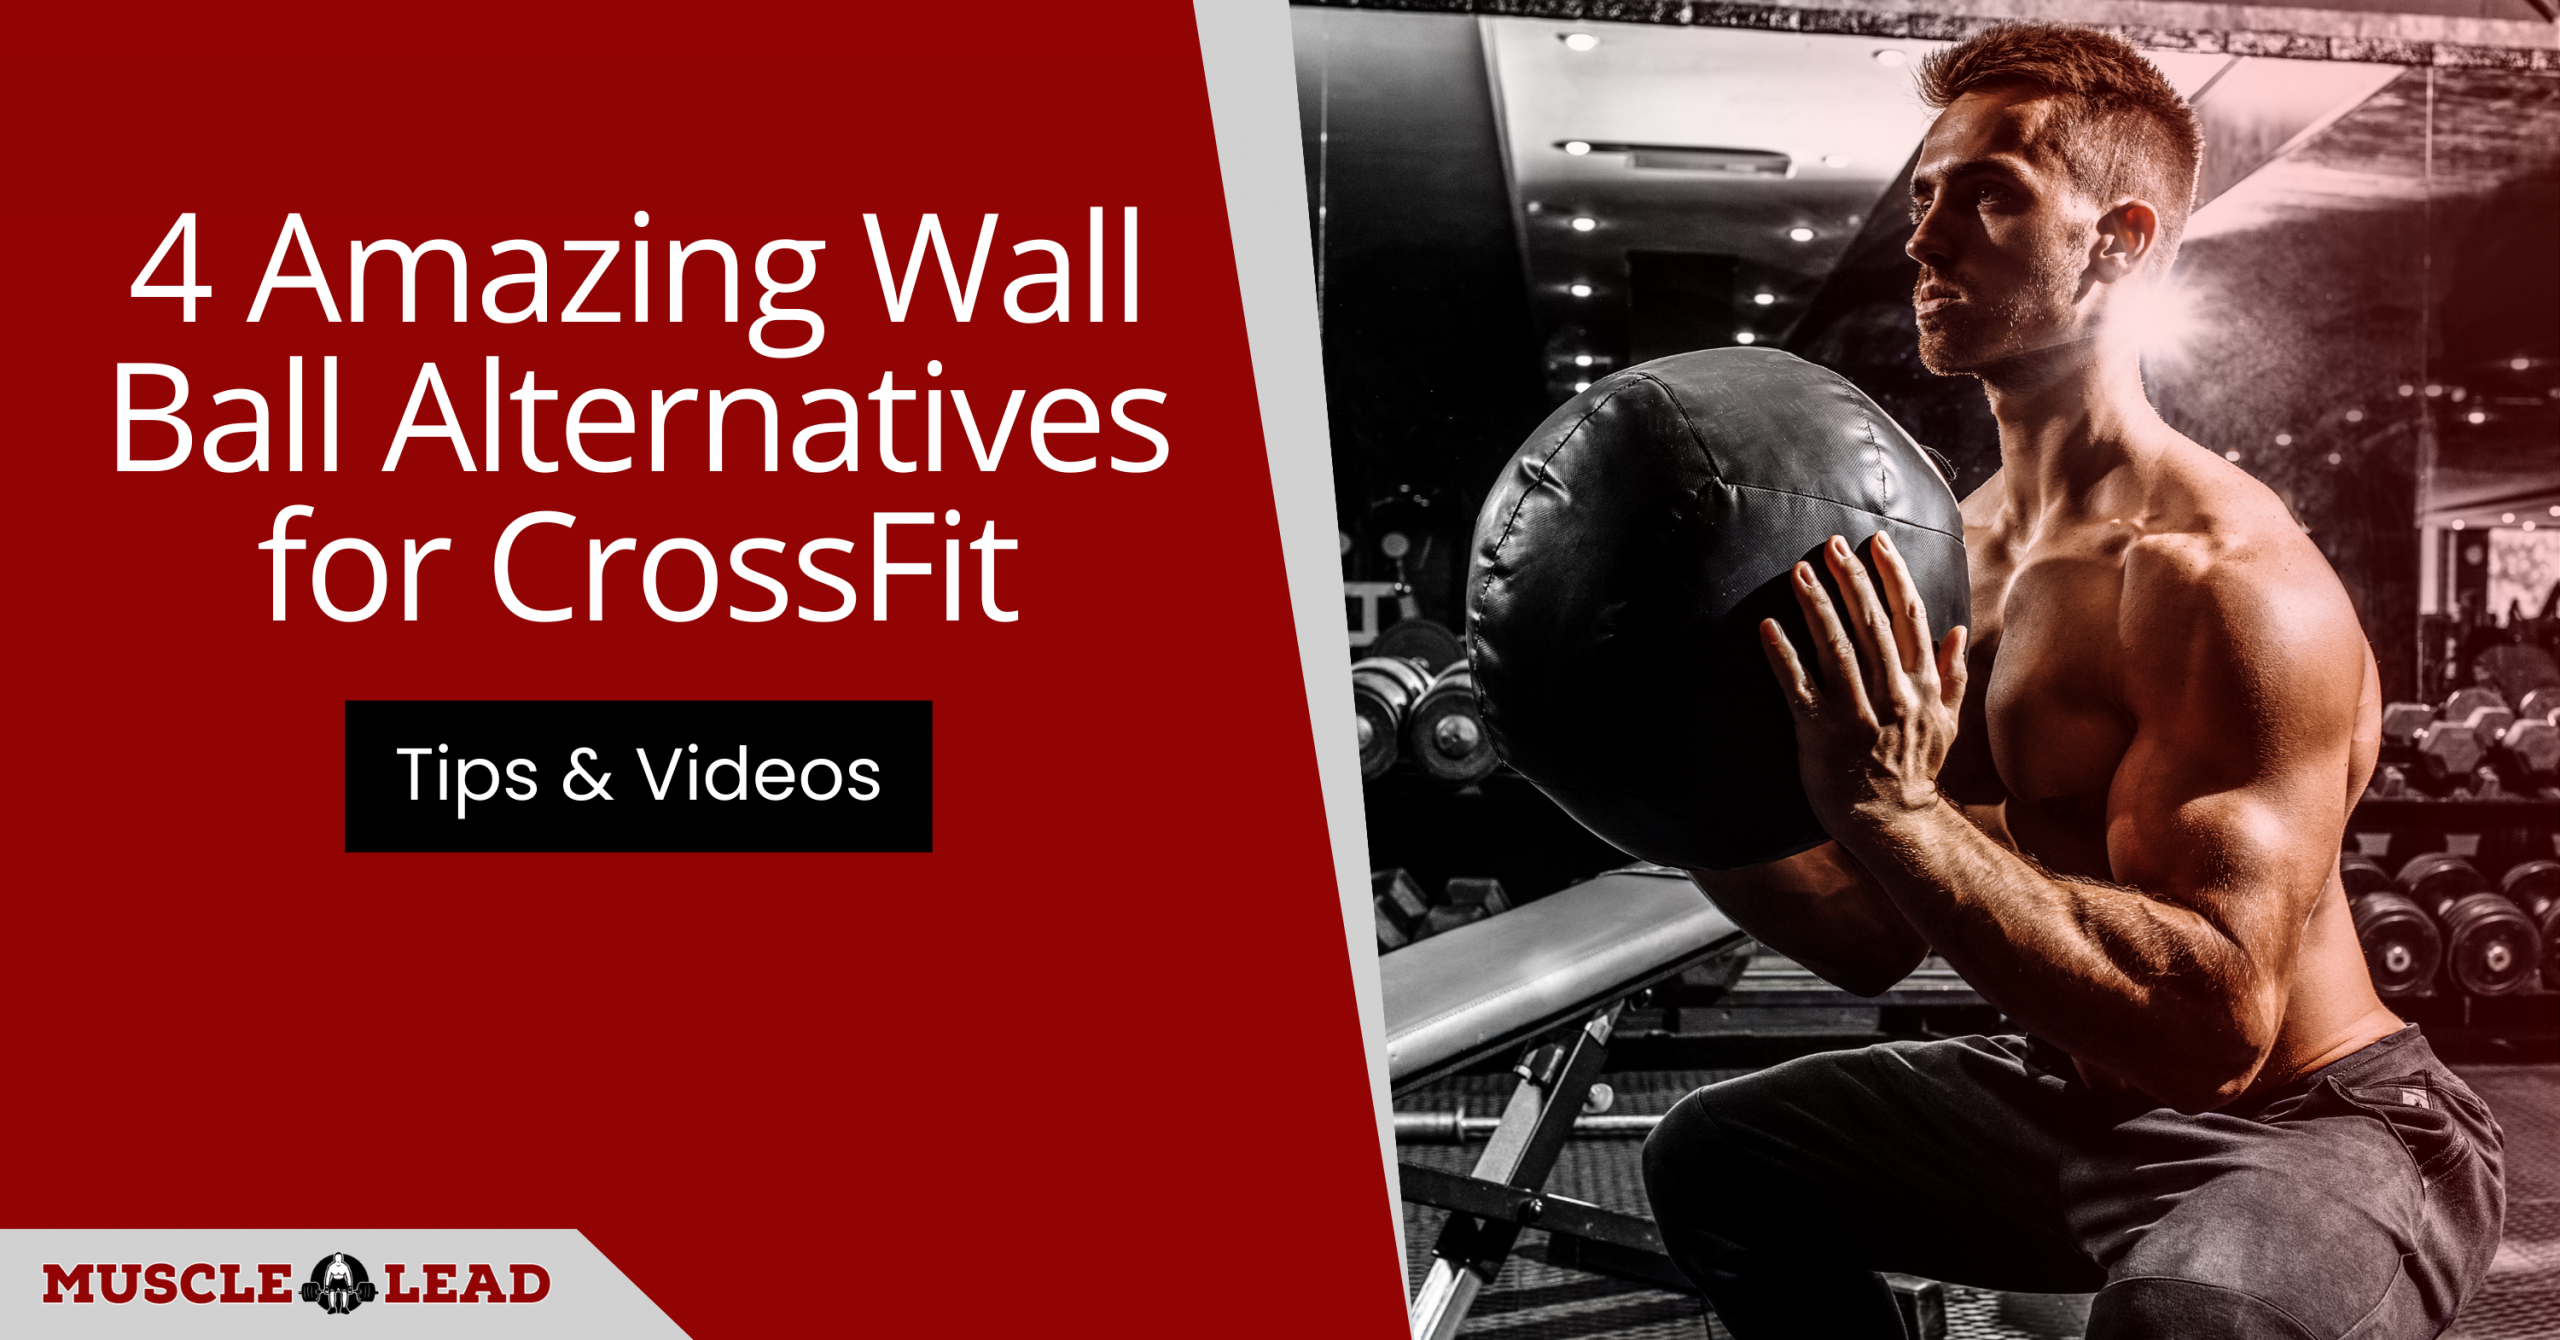 4 Amazing Wall Ball Alternatives for CrossFit Tips & Videos (1)